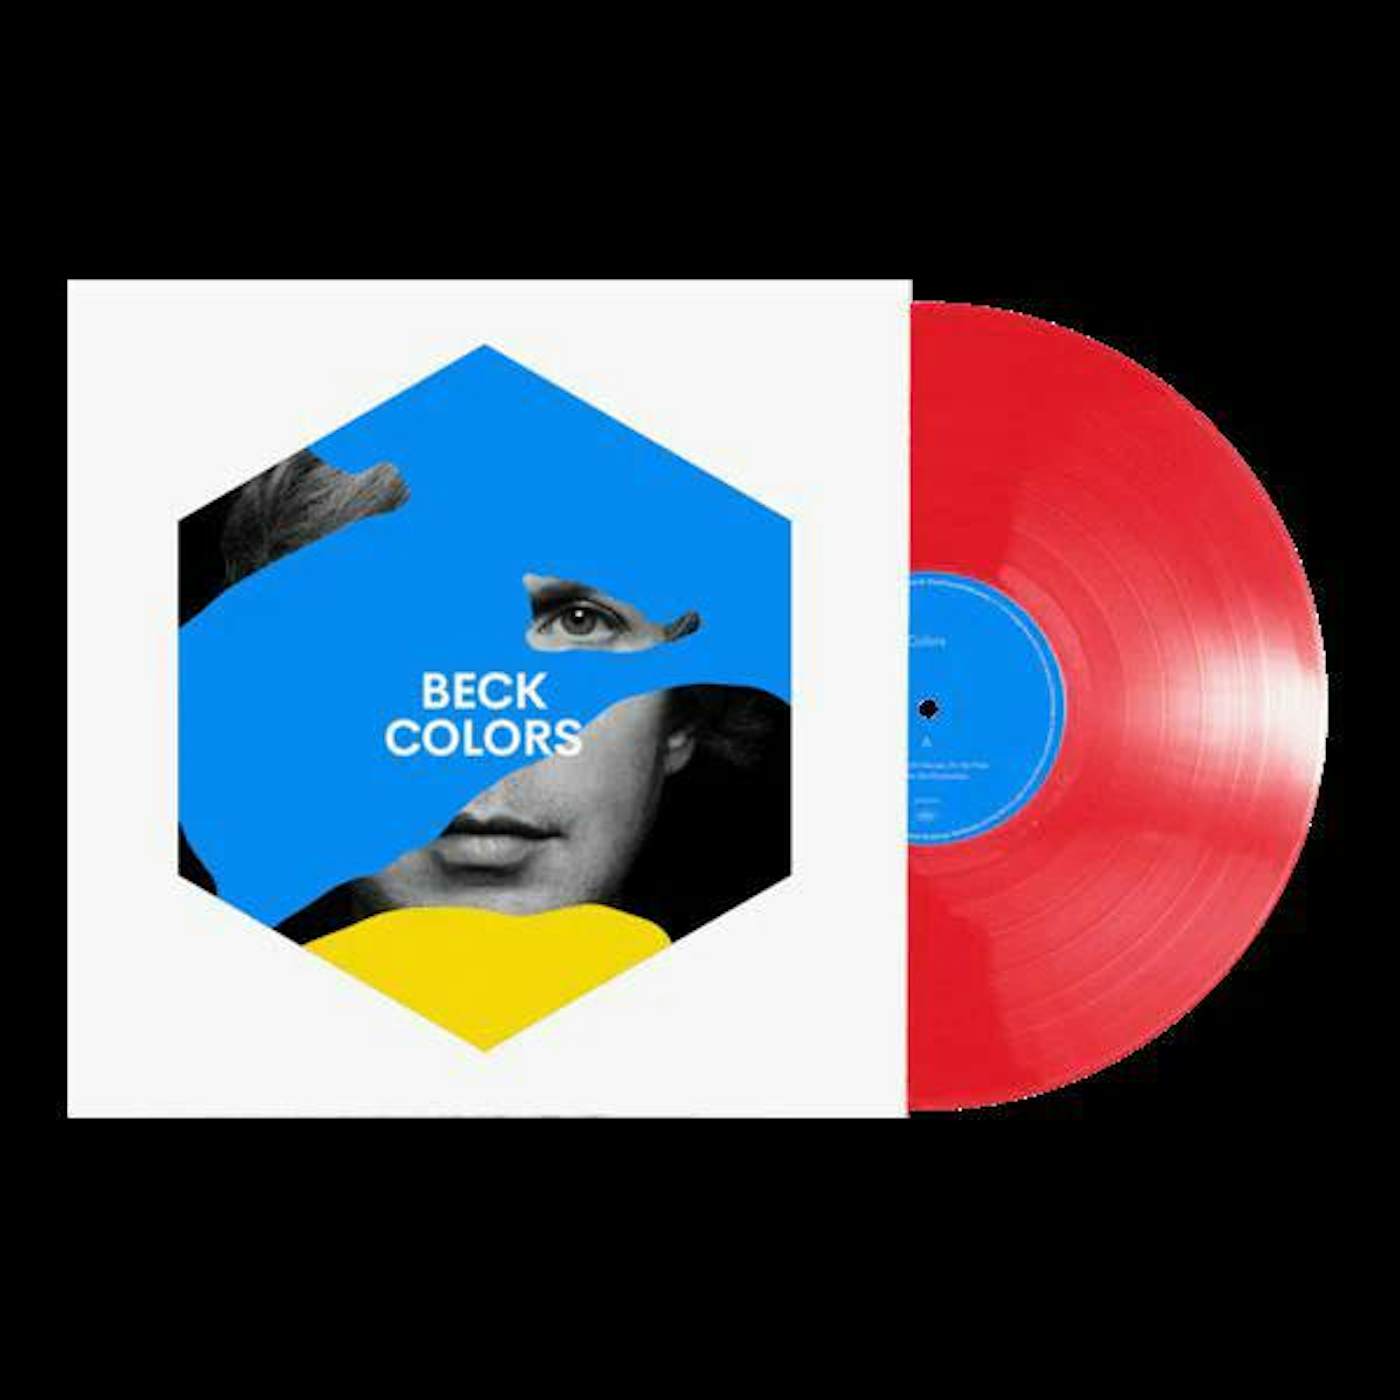 Beck Colors (Red Vinyl Record)